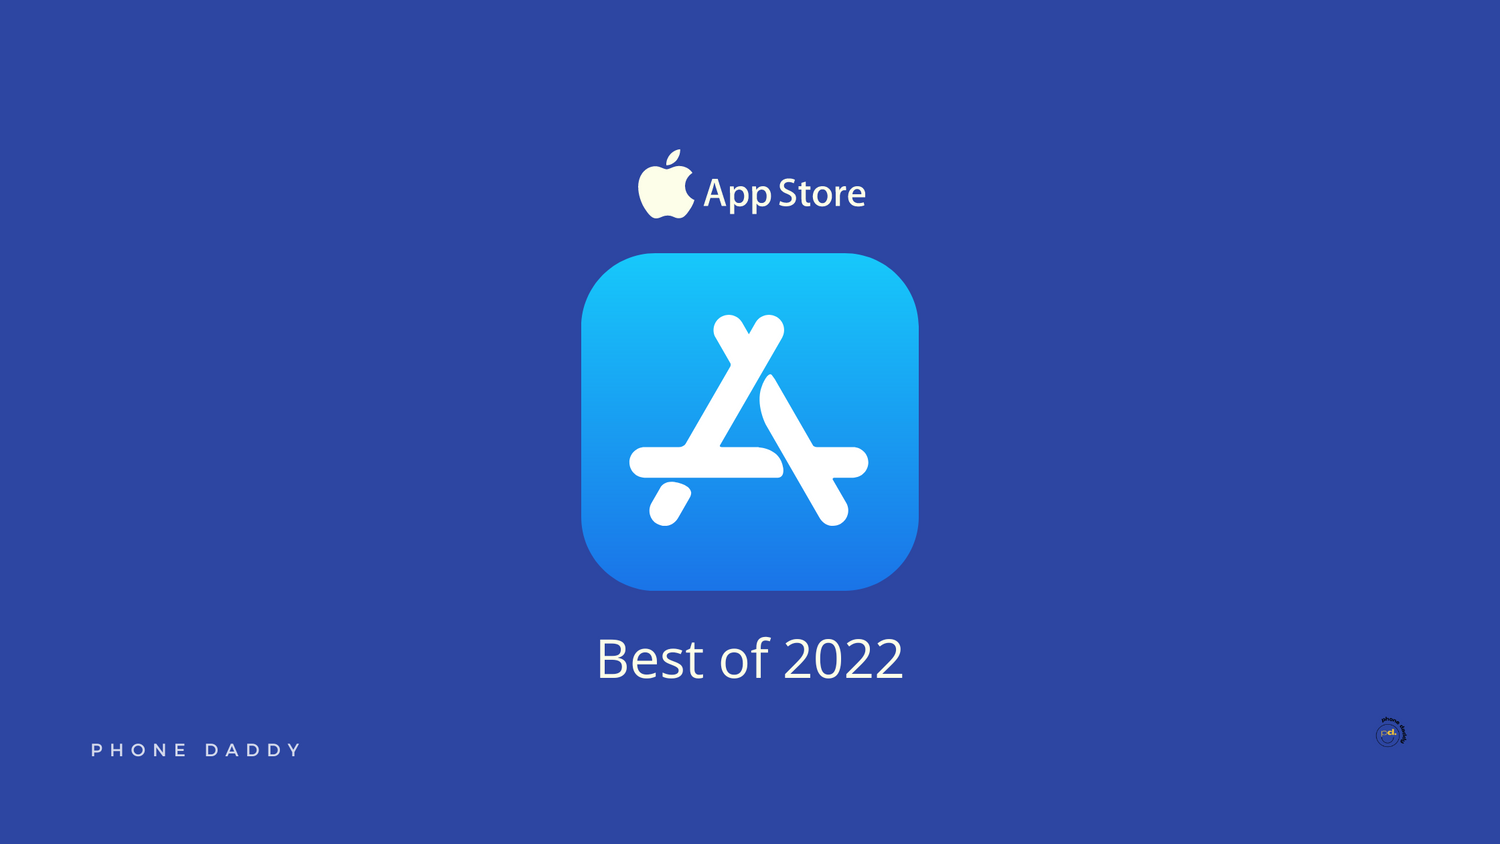 App Store Awards Celebrate the Best Apps and Games of 2022 Phone Daddy